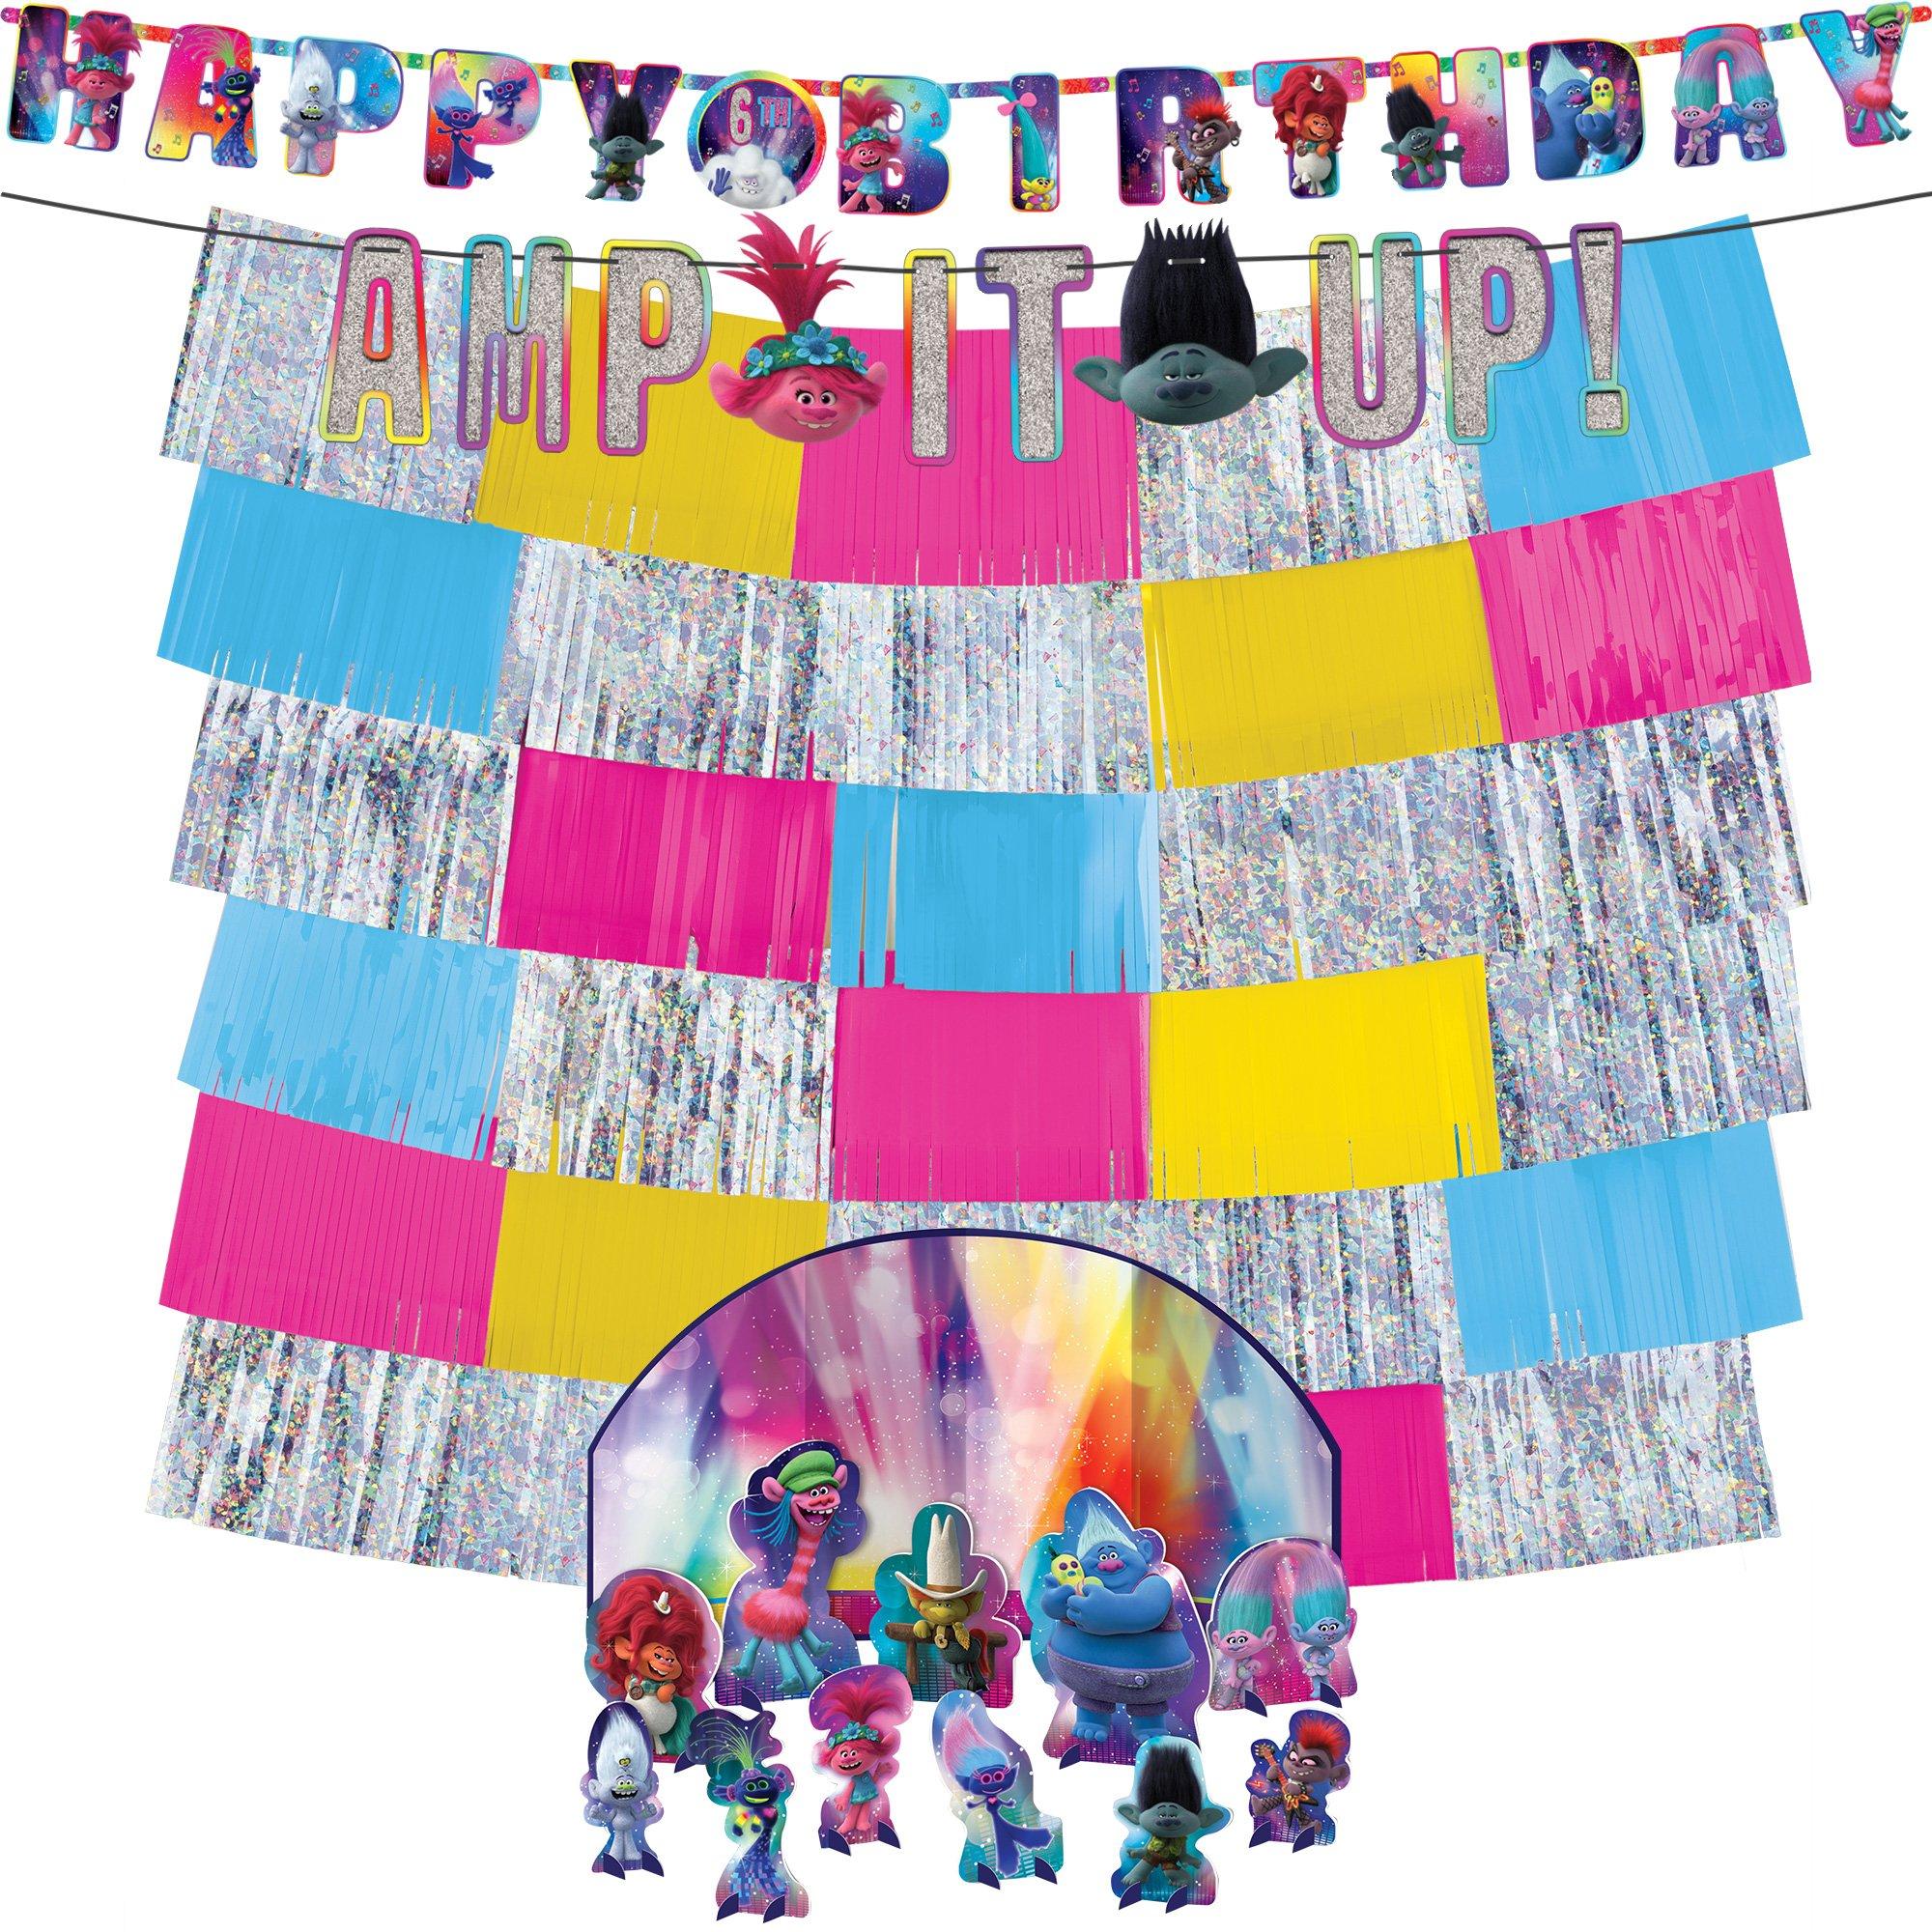 Trolls World Tour Birthday Party Decorating Supplies Pack - Kit Includes Banner, Backdrop & Table Decorations